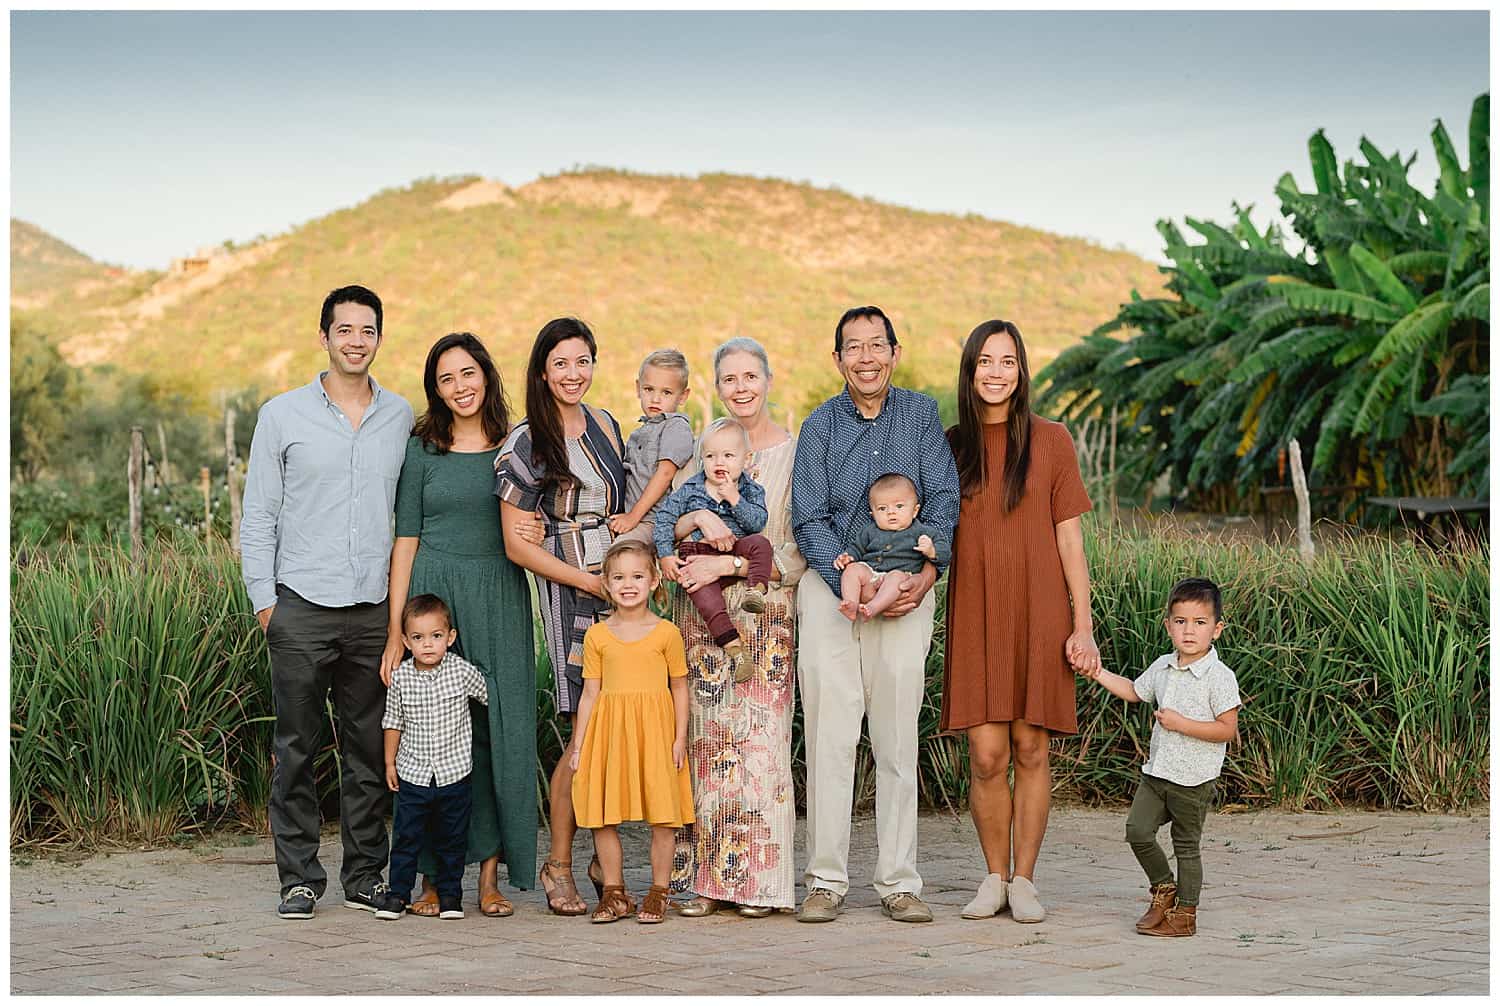 Cabo family session